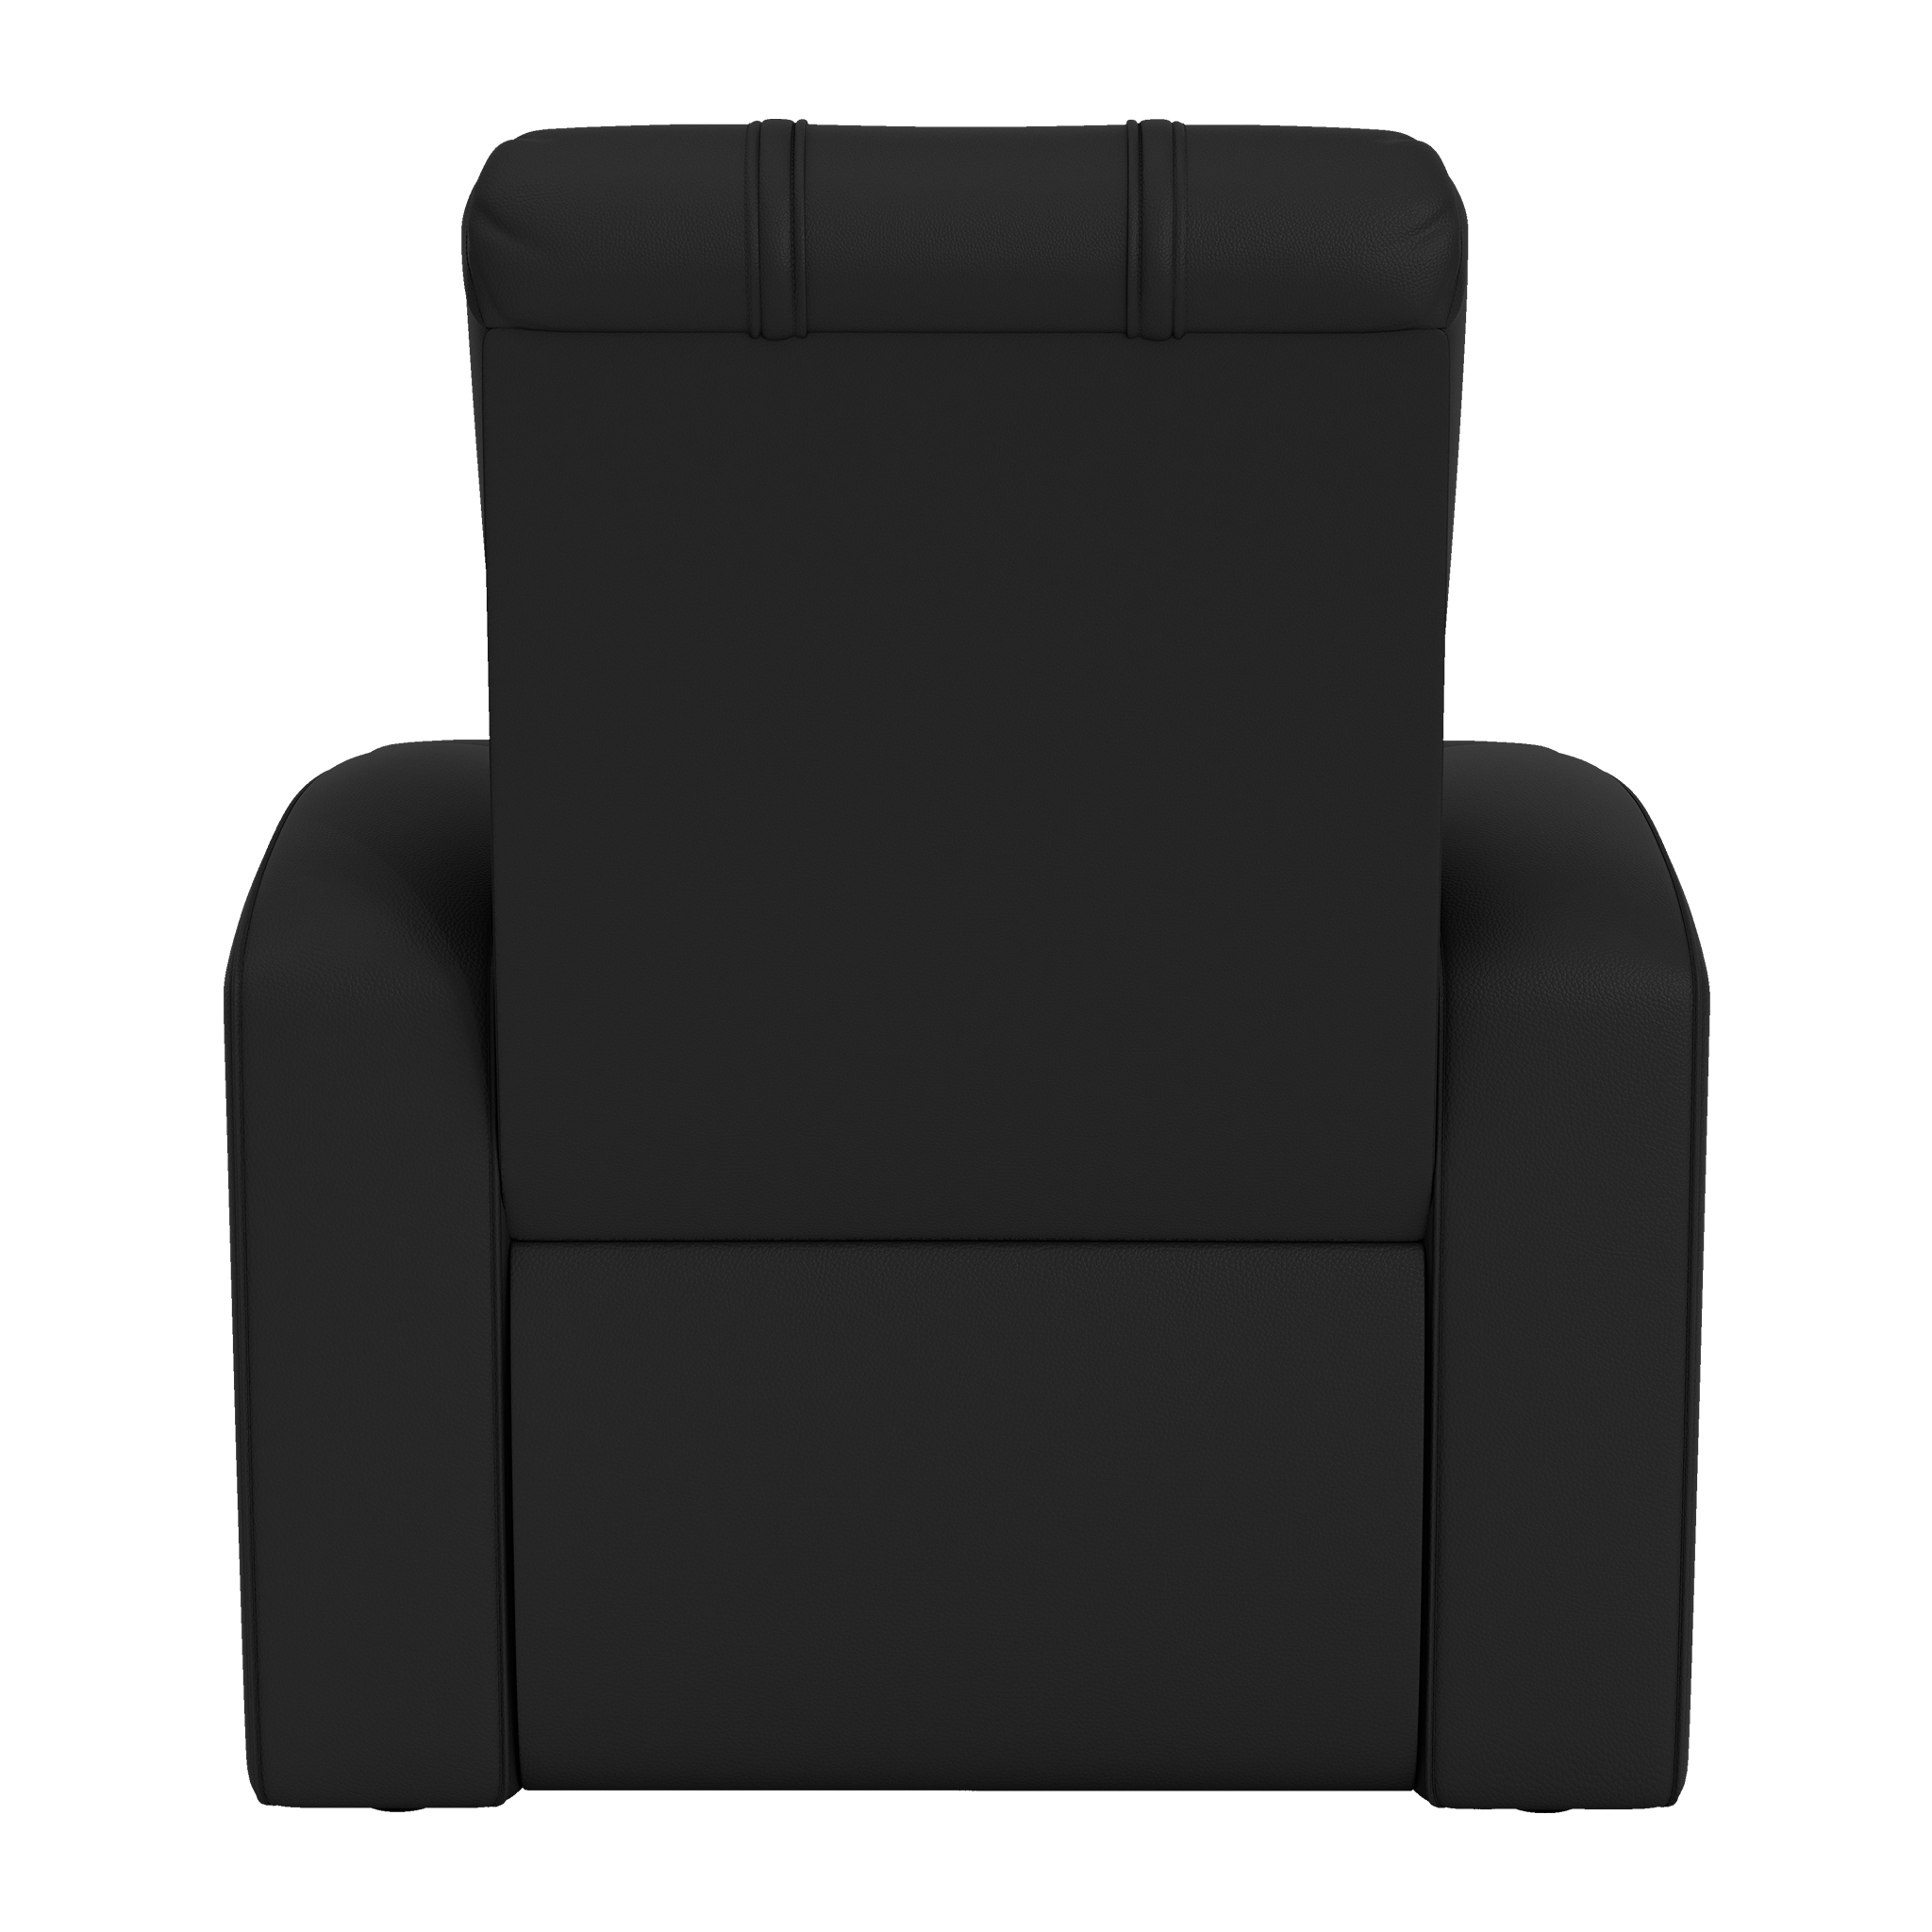 Relax Home Theater Recliner with New York Yankees Cooperstown